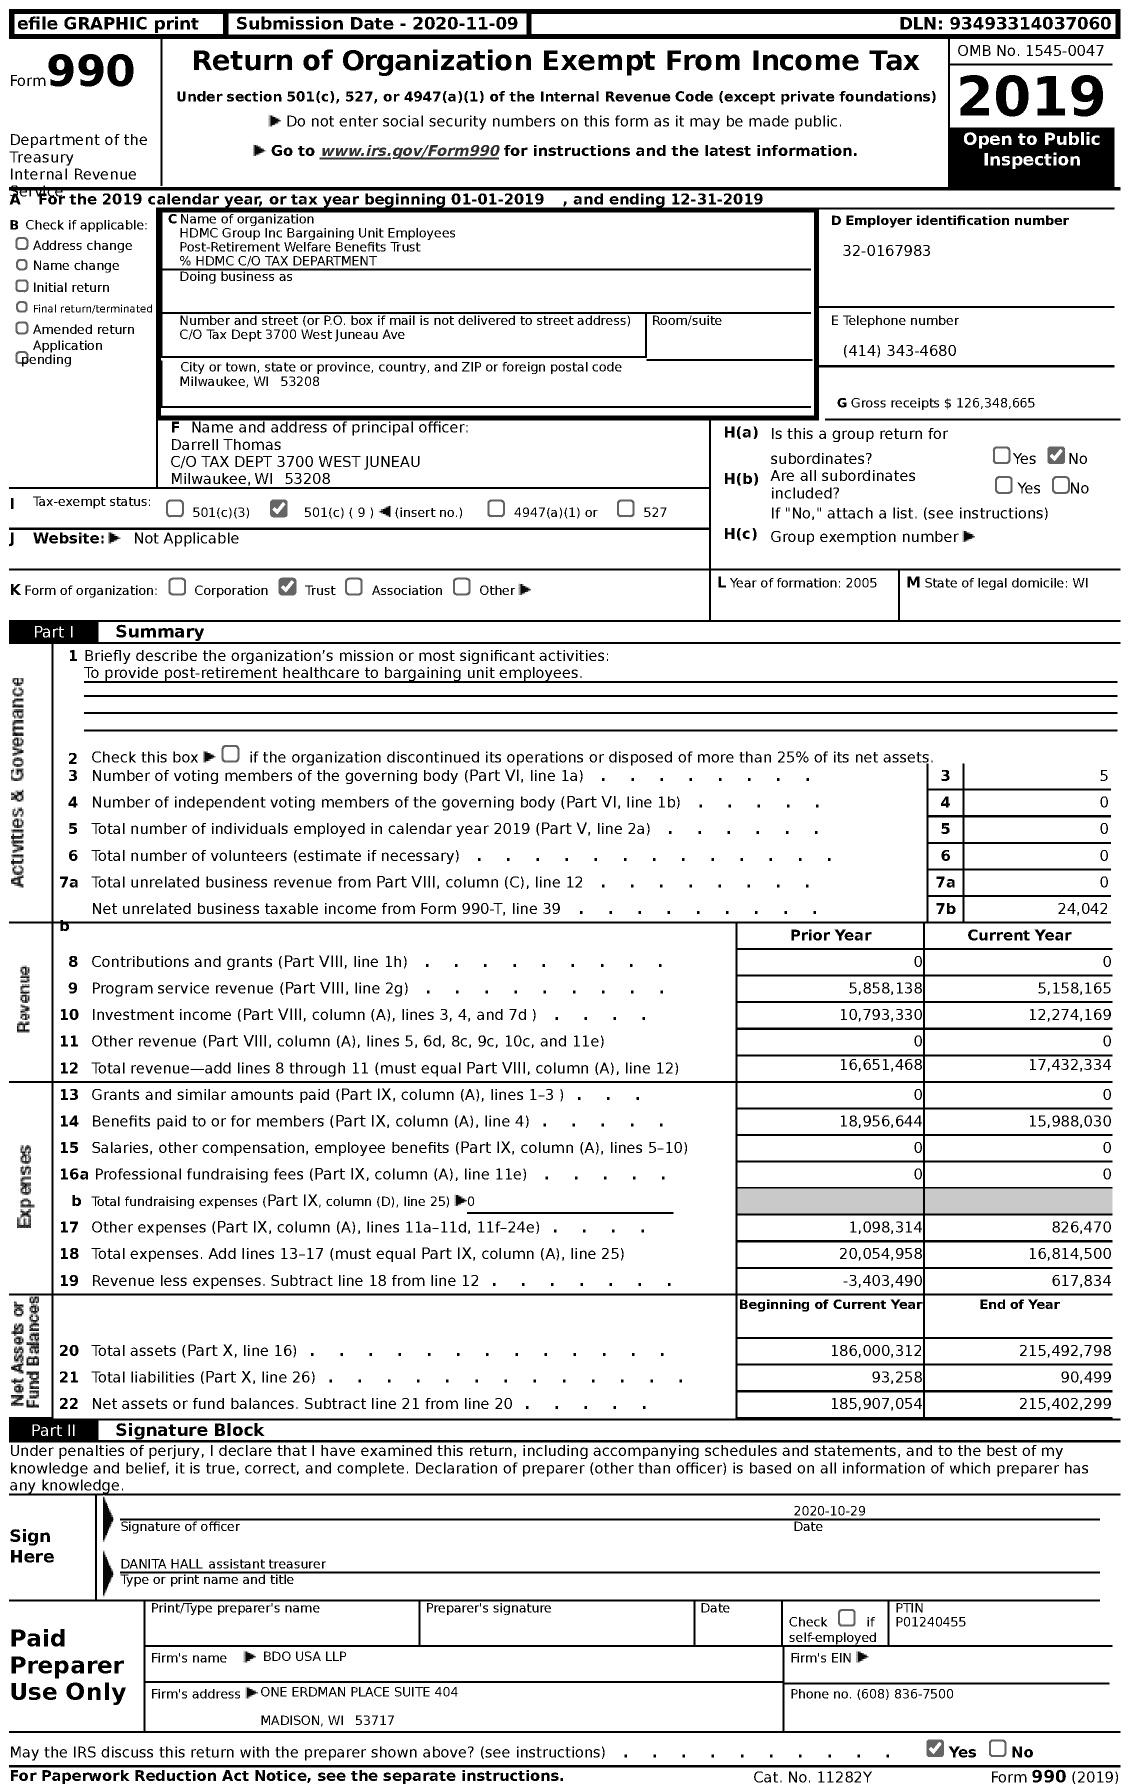 Image of first page of 2019 Form 990 for HDMC Group Inc Bargaining Unit Employees Post-Retirement Welfare Benefits Trust